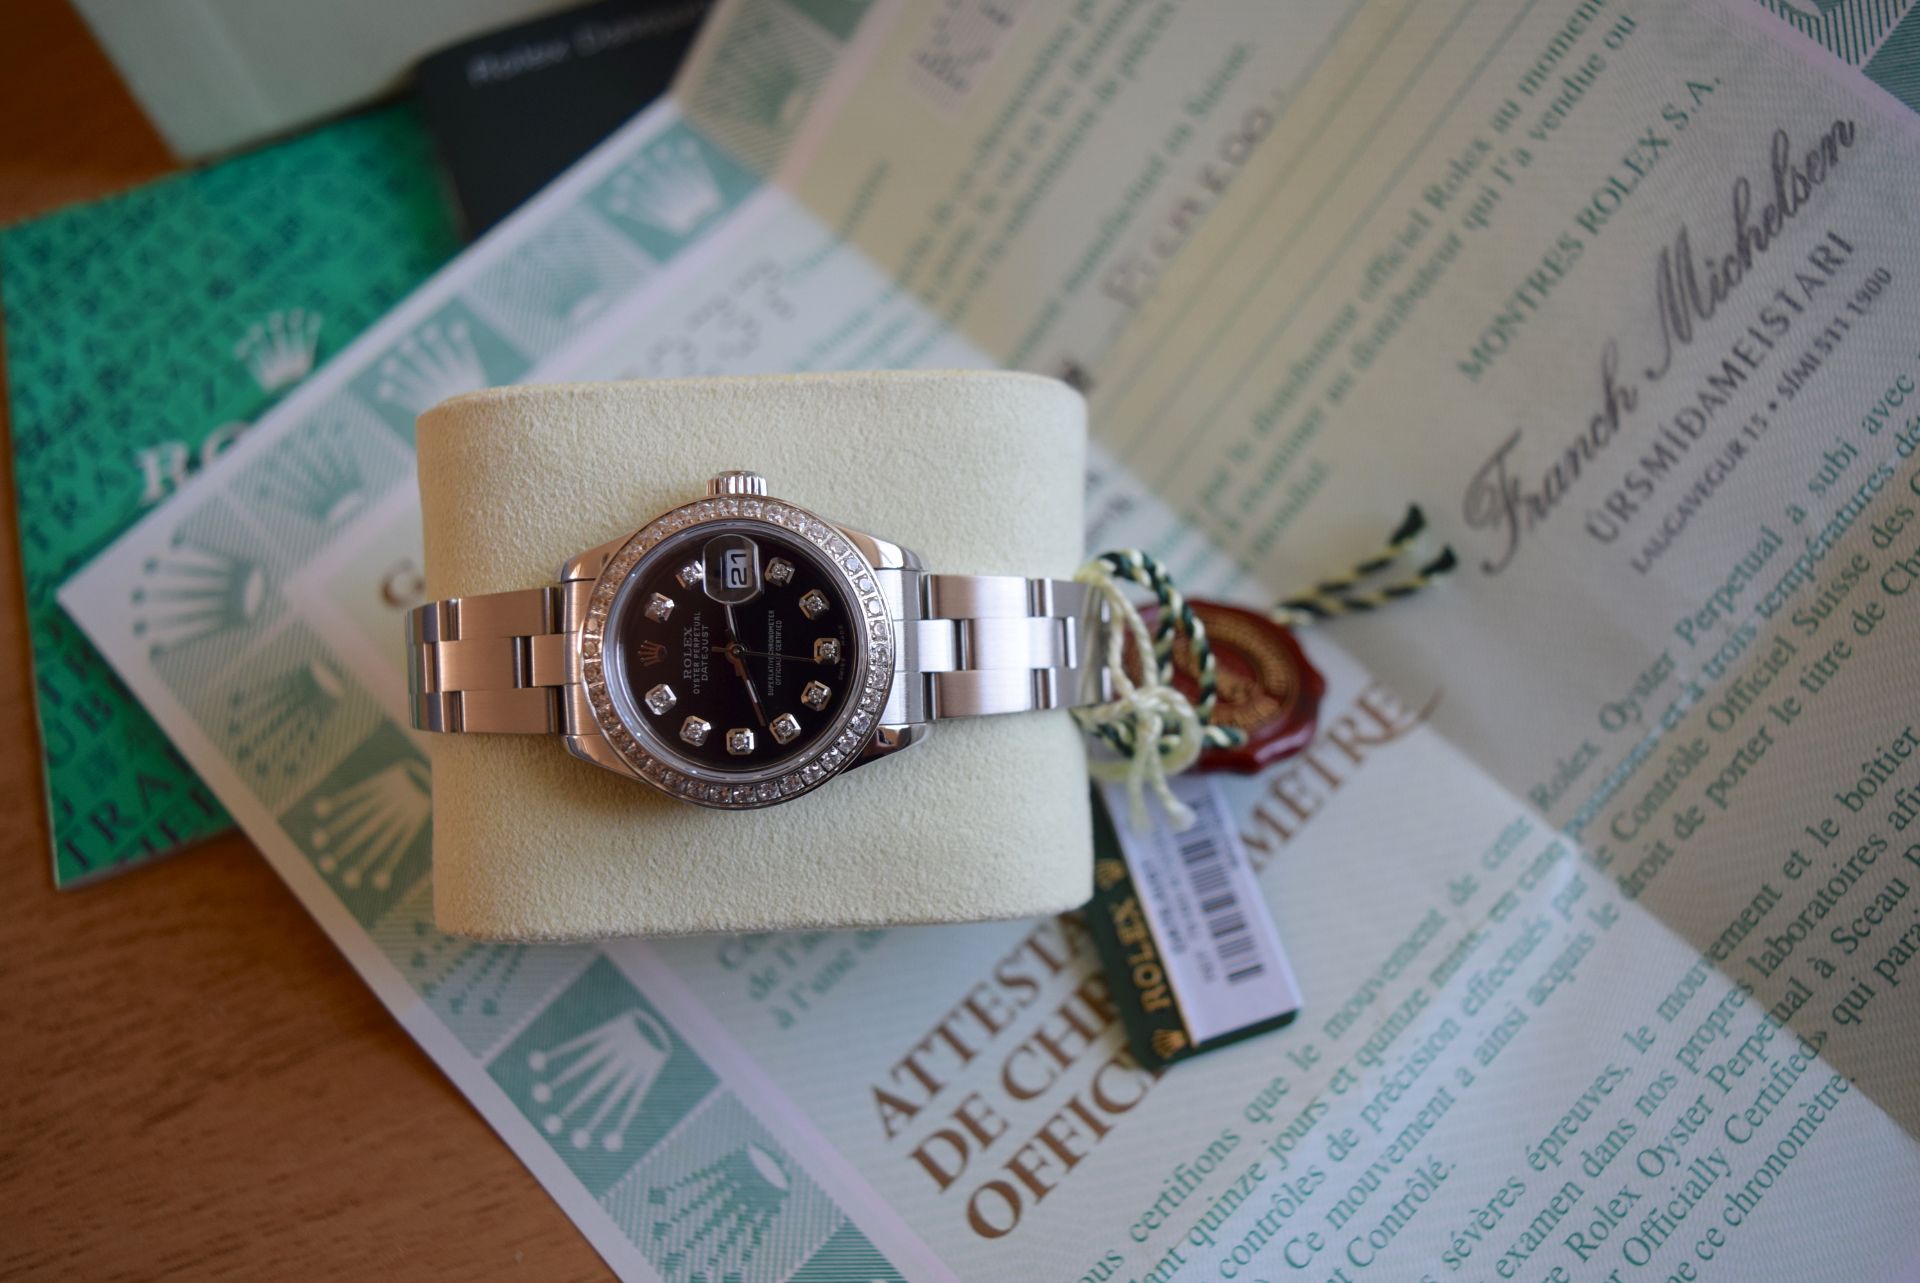 (Full Set) *Gorgeous* 2002 Rolex Oyster Datejust Stainless Steel - Glossy Black Diamond-set Dial - Image 15 of 25